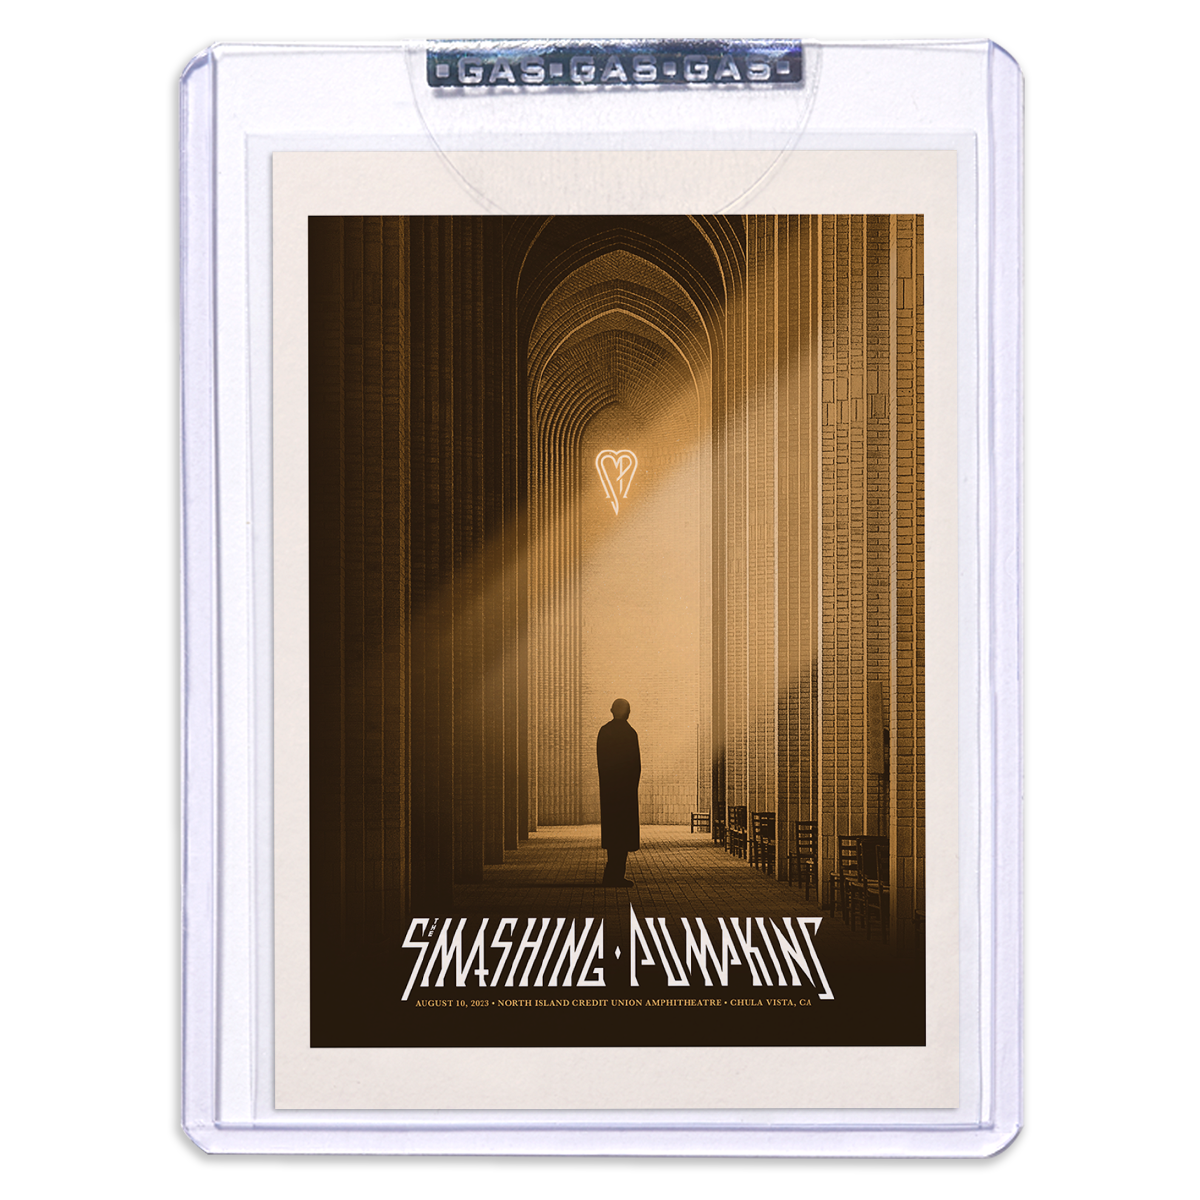 GAS The Smashing Pumpkins August 10, 2023, Chula Vista, CA Setlist Trading Card Illustrated by Simon Marchner